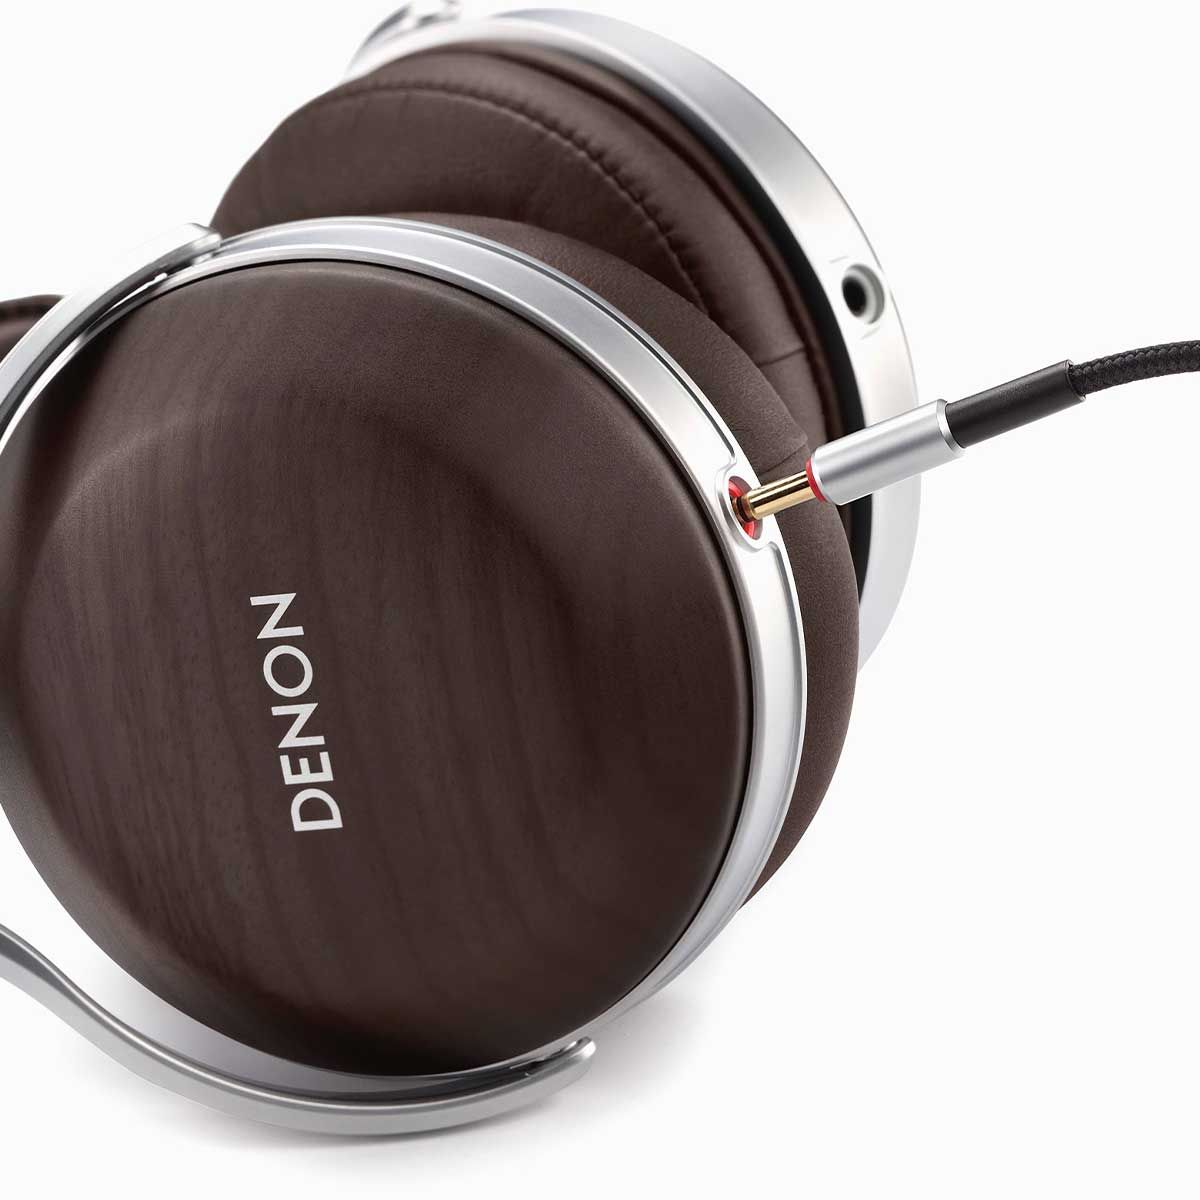 Close-up shot of the Denon AH-D5200 Closed-Back Headphone ear cup.